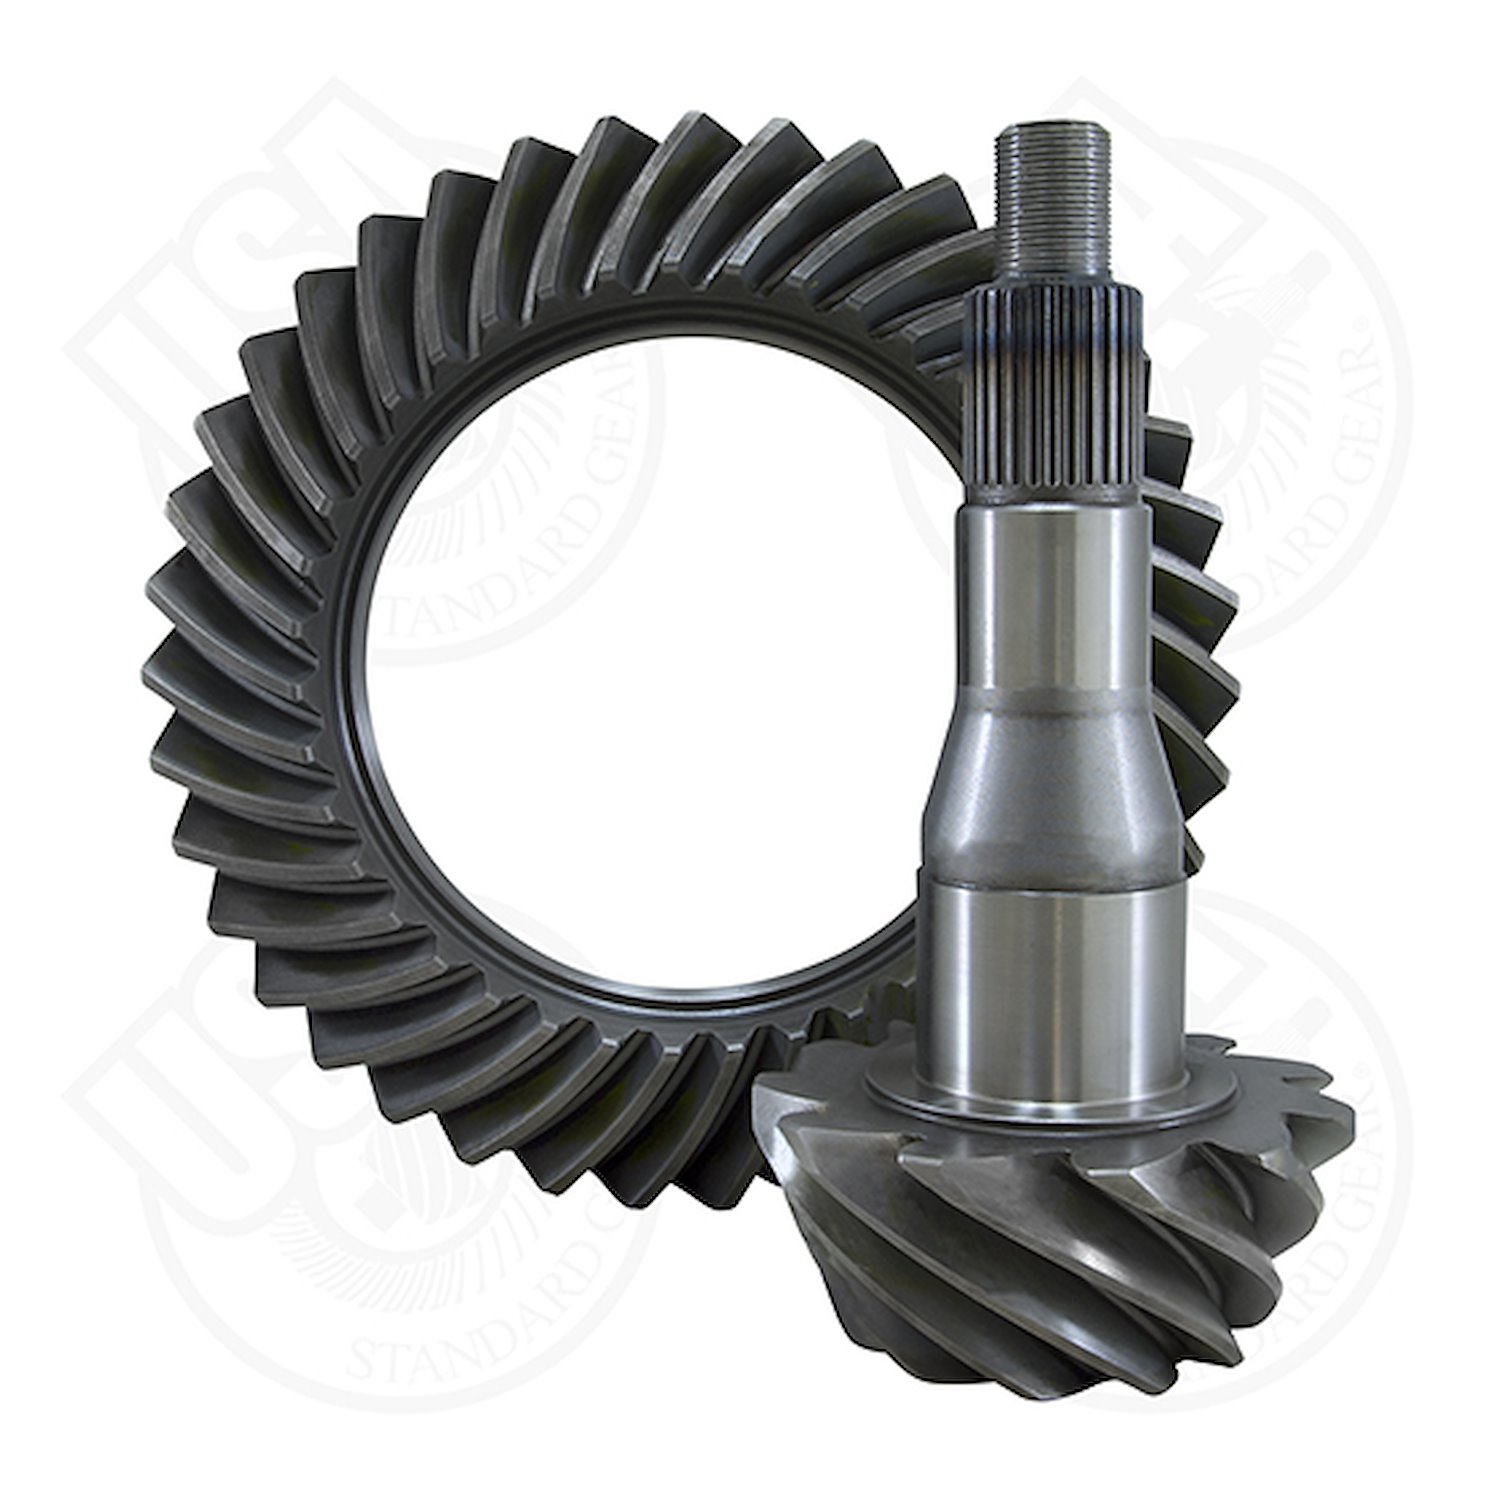 USA Standard Ring / Pinion 11 / up Ford 9.75 4.56 ratio